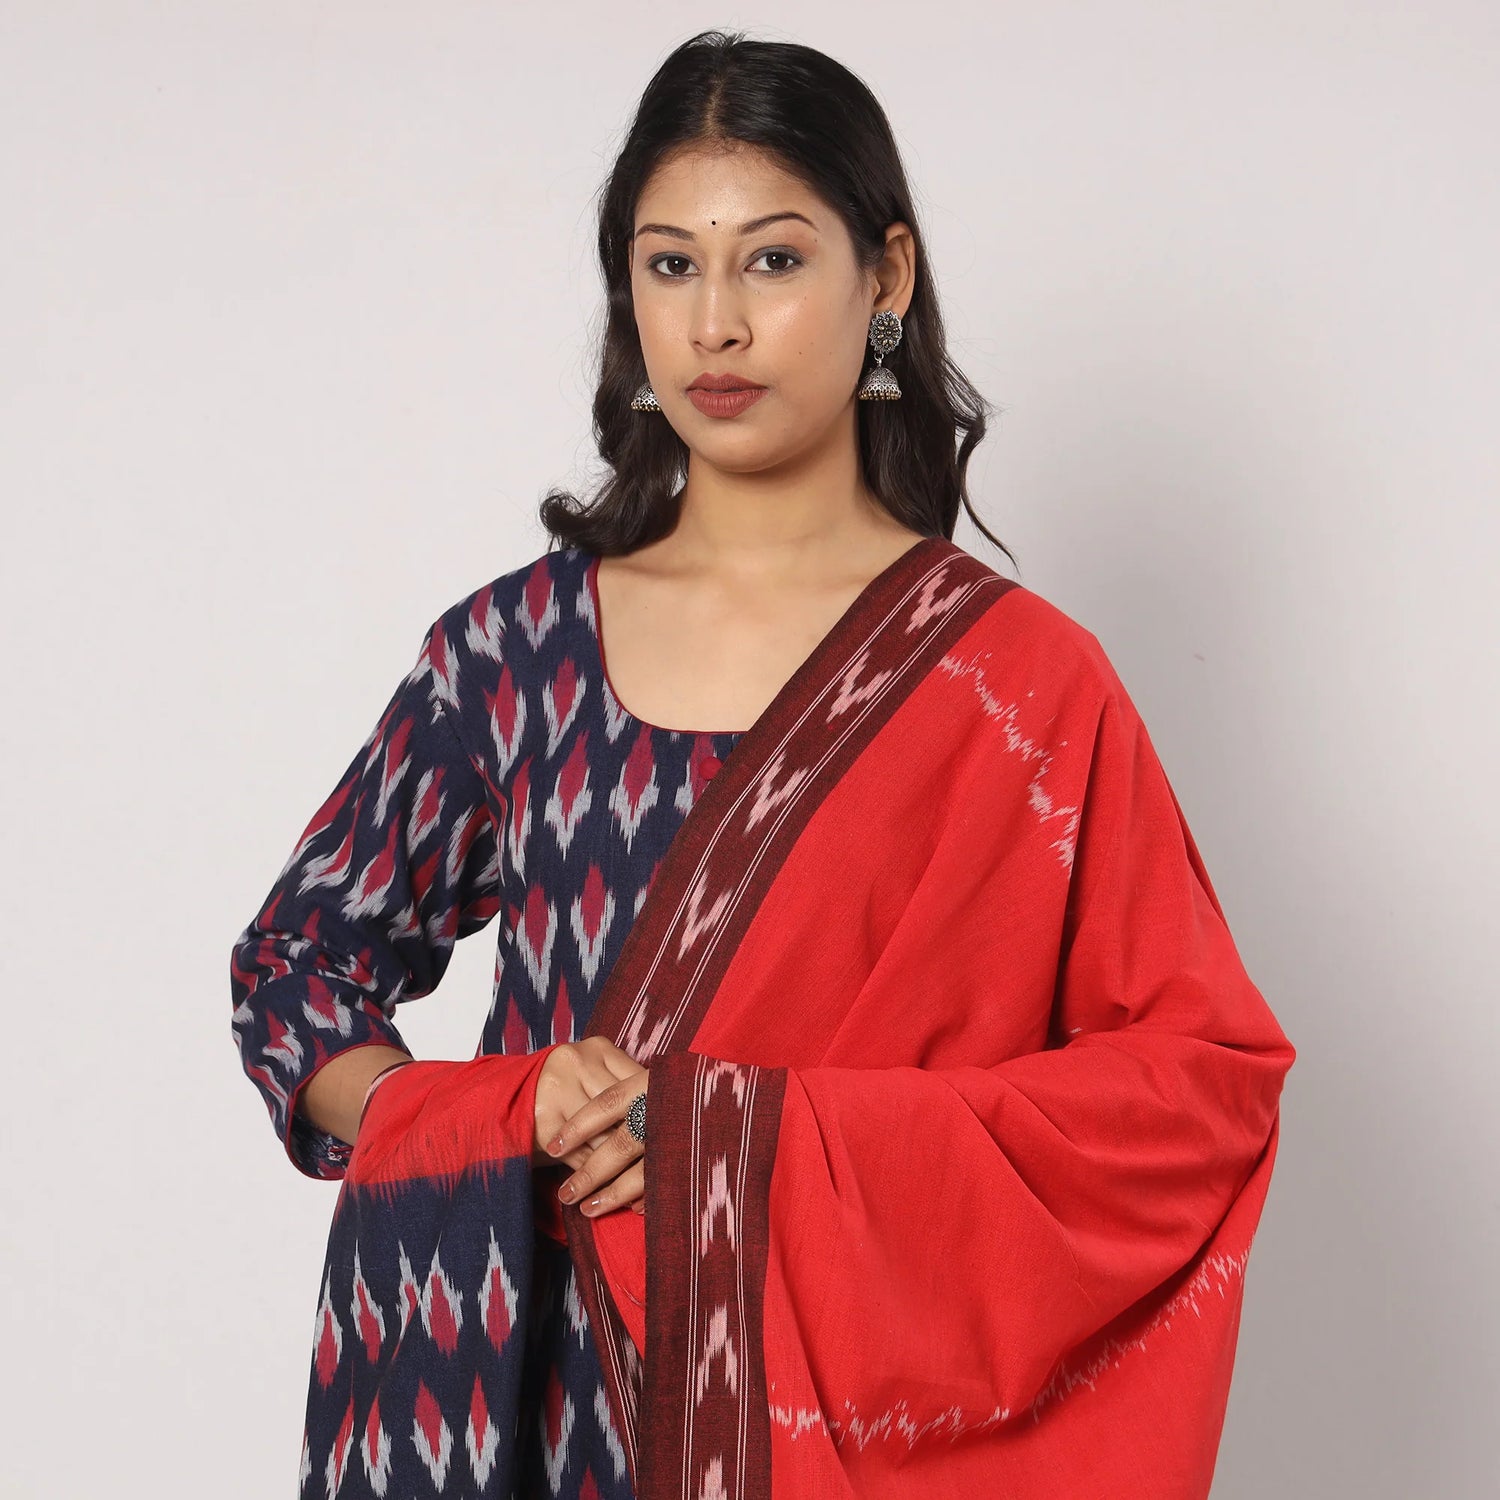 Fall in Love with Indian Handloom Sarees from Loomfolks